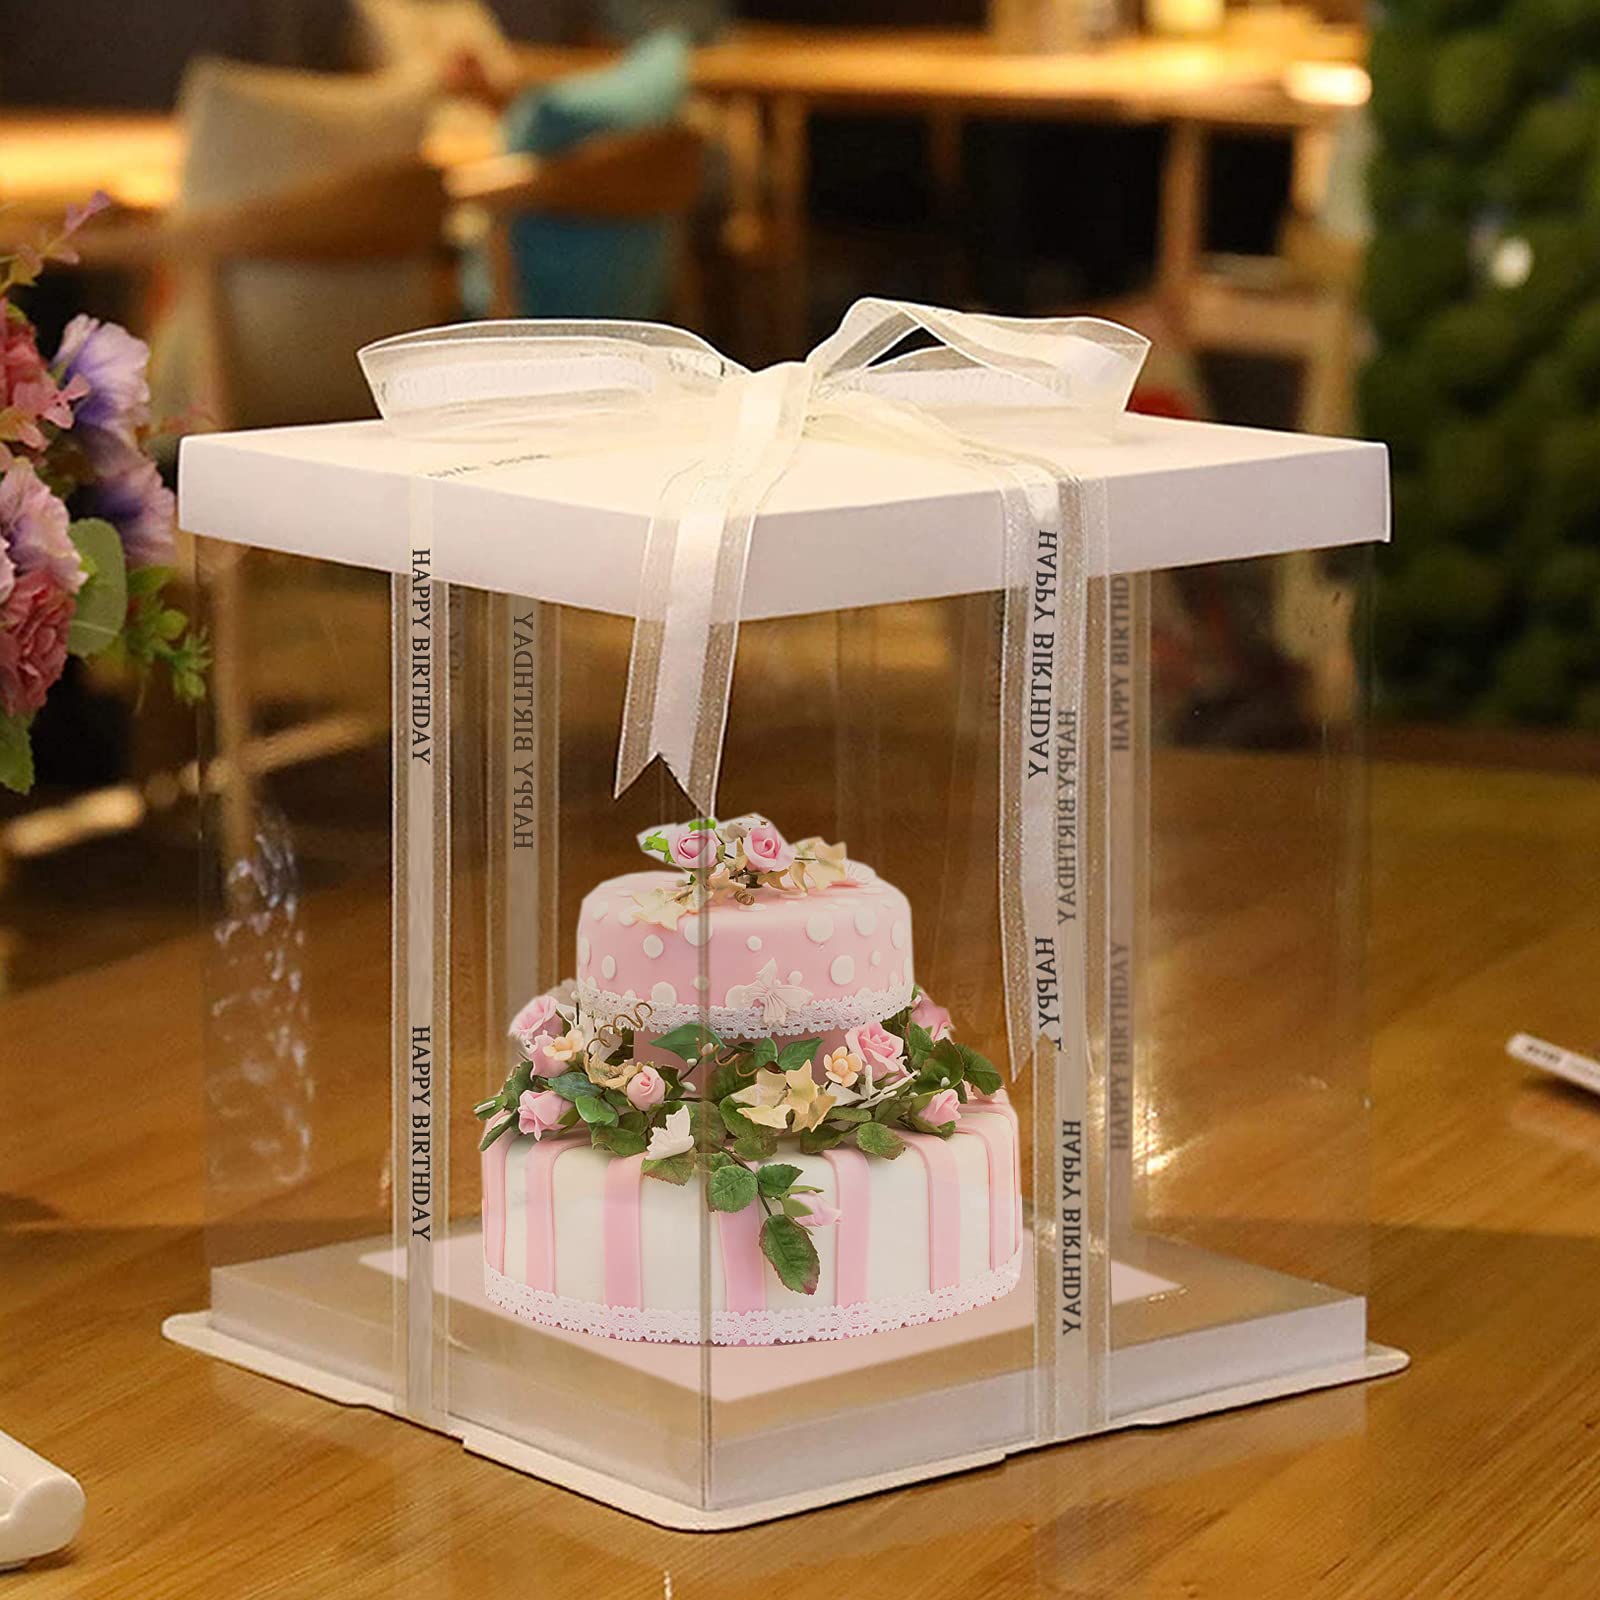 10Pcs PET Clear Cake Box,7x7x8 Inch Cake Packaging Boxes, Transparent Cake Boxes of Bakery, Clear Gift Boxes, Plastic Candy Box with Lid and Ribbon, Cake Carrier Display for Wedding Party Birthday